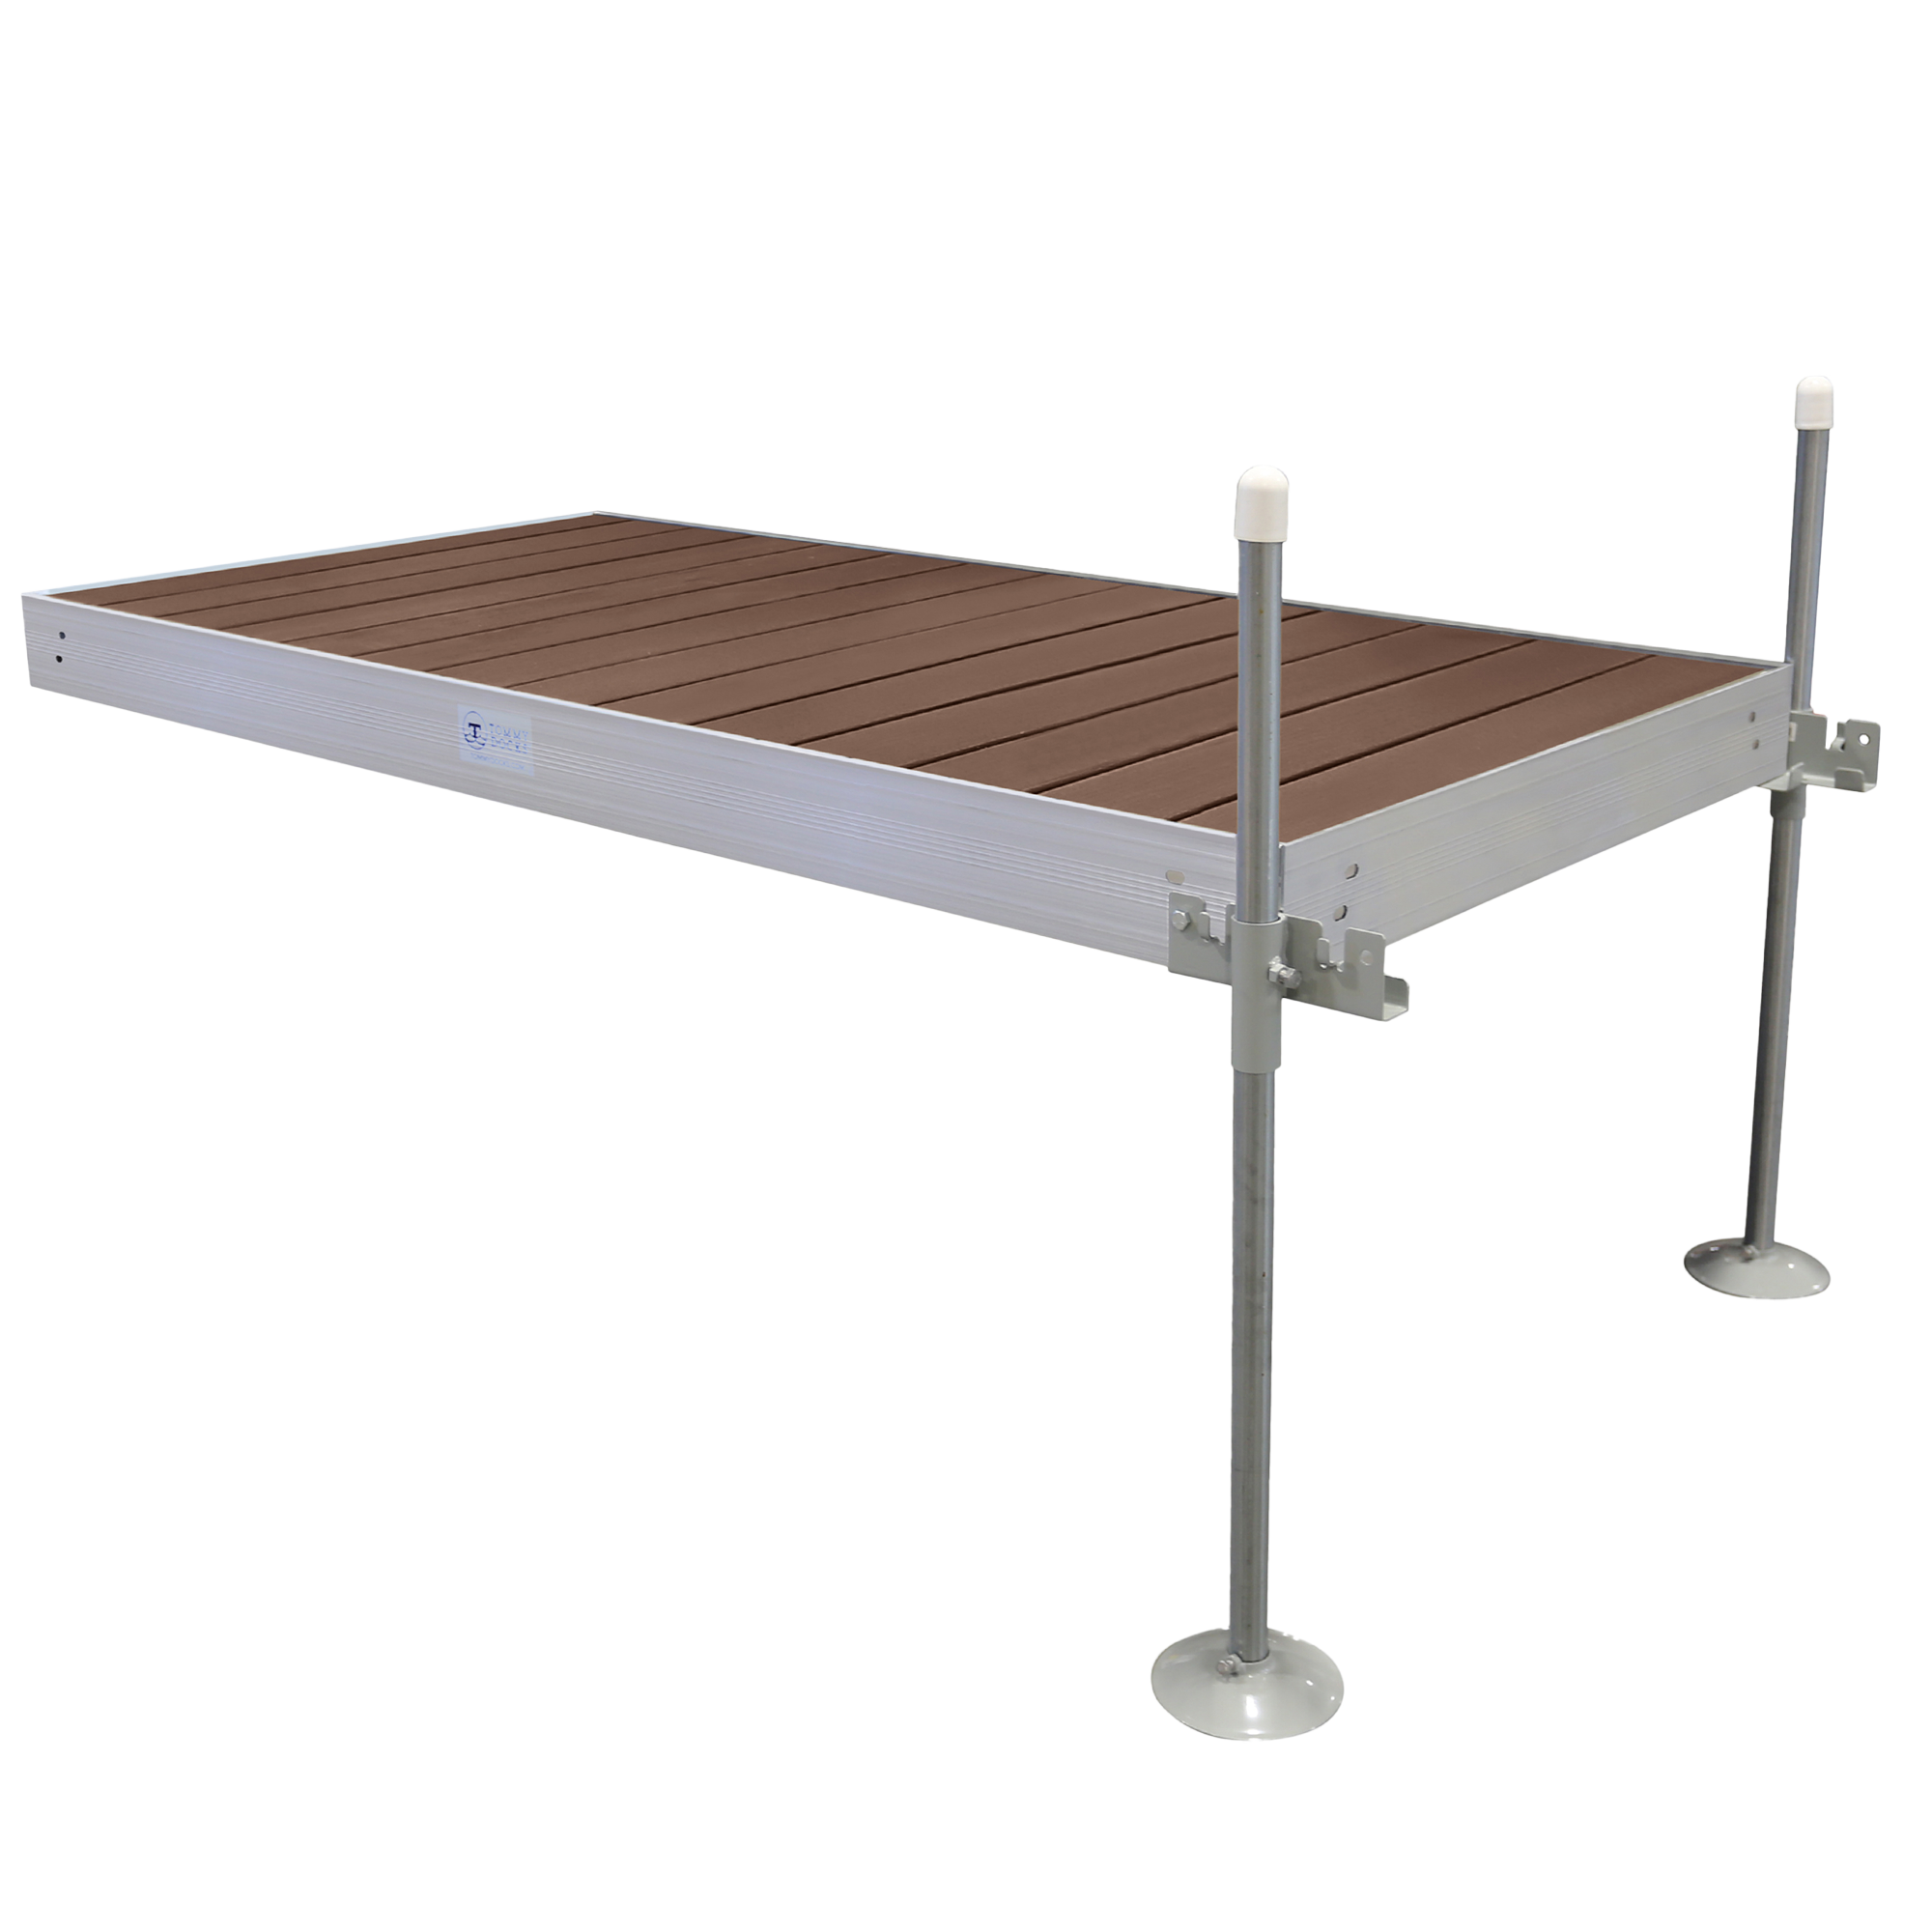 8' Straight Boat Dock System Extender Package with Aluminum Frame and Brown Composite Decking